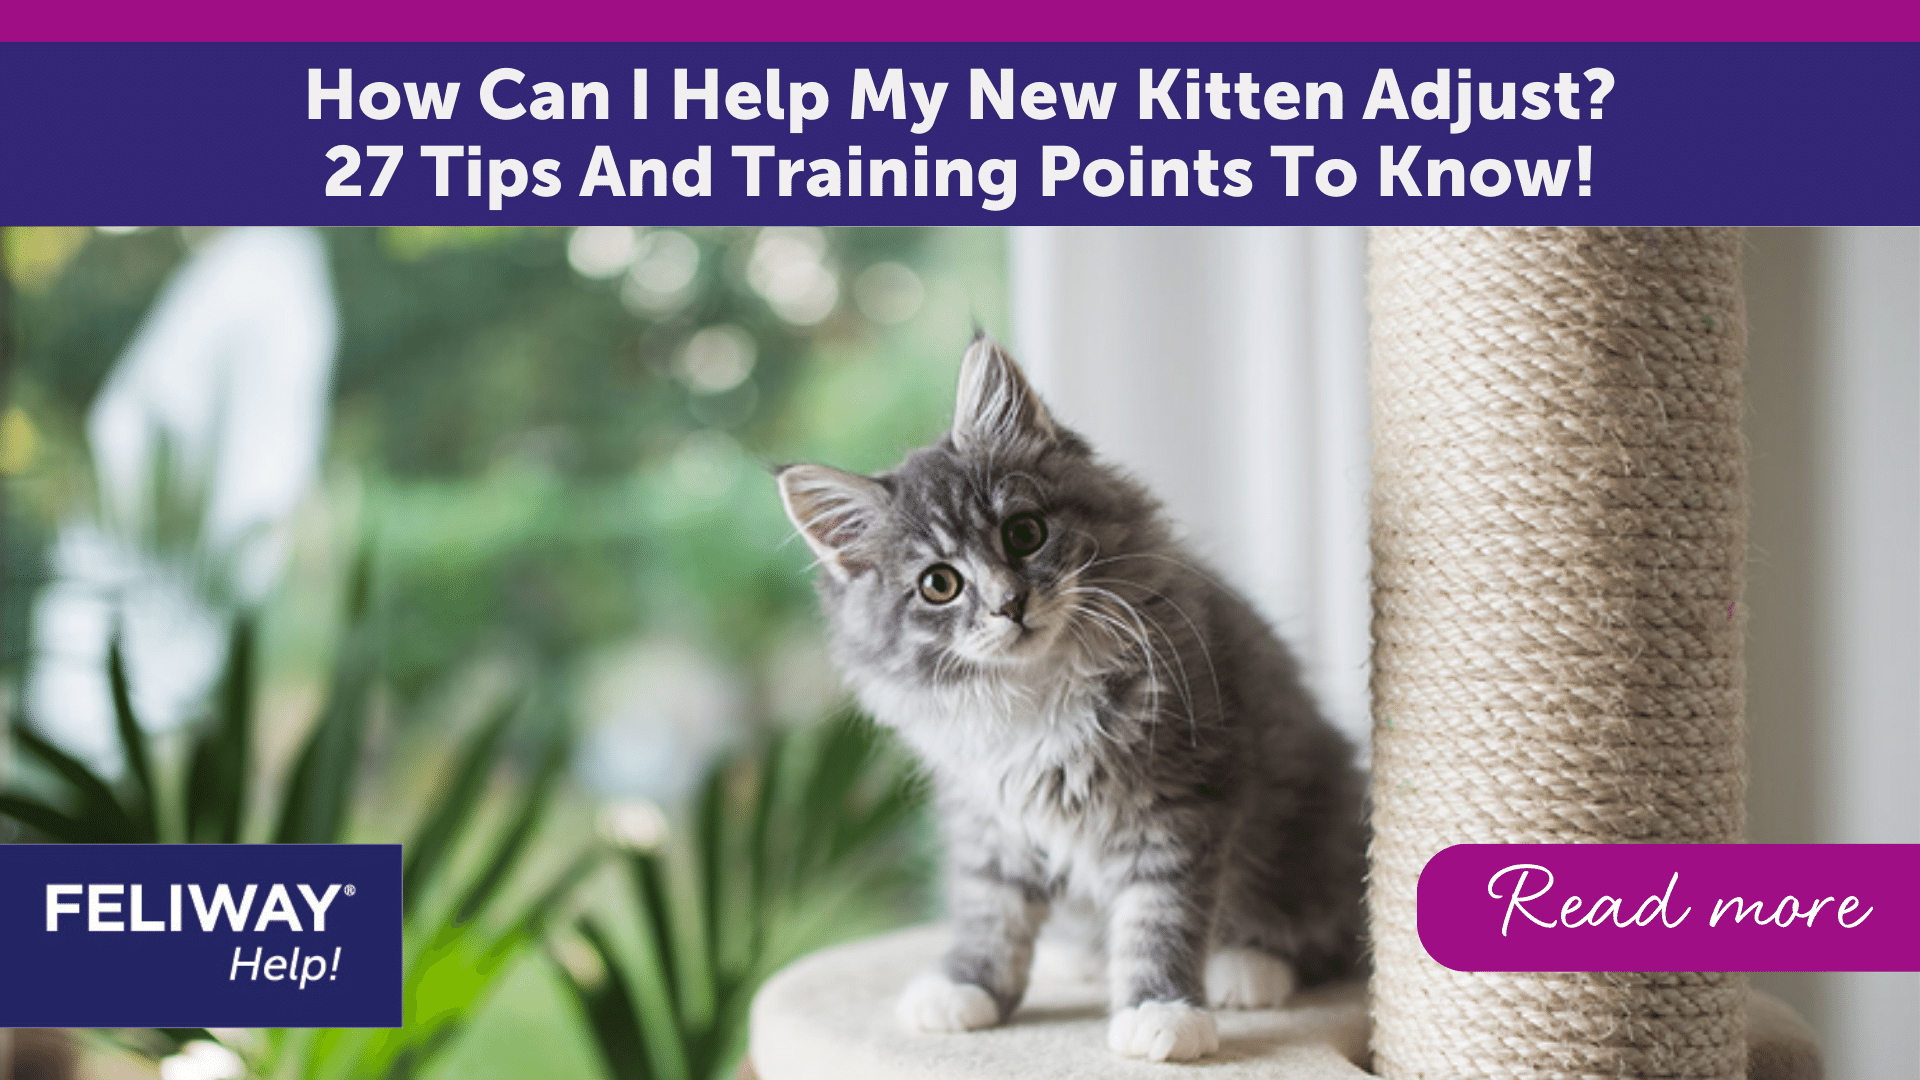 How Can I Help My New Kitten Adjust? 27 Tips And Training Points To Know!